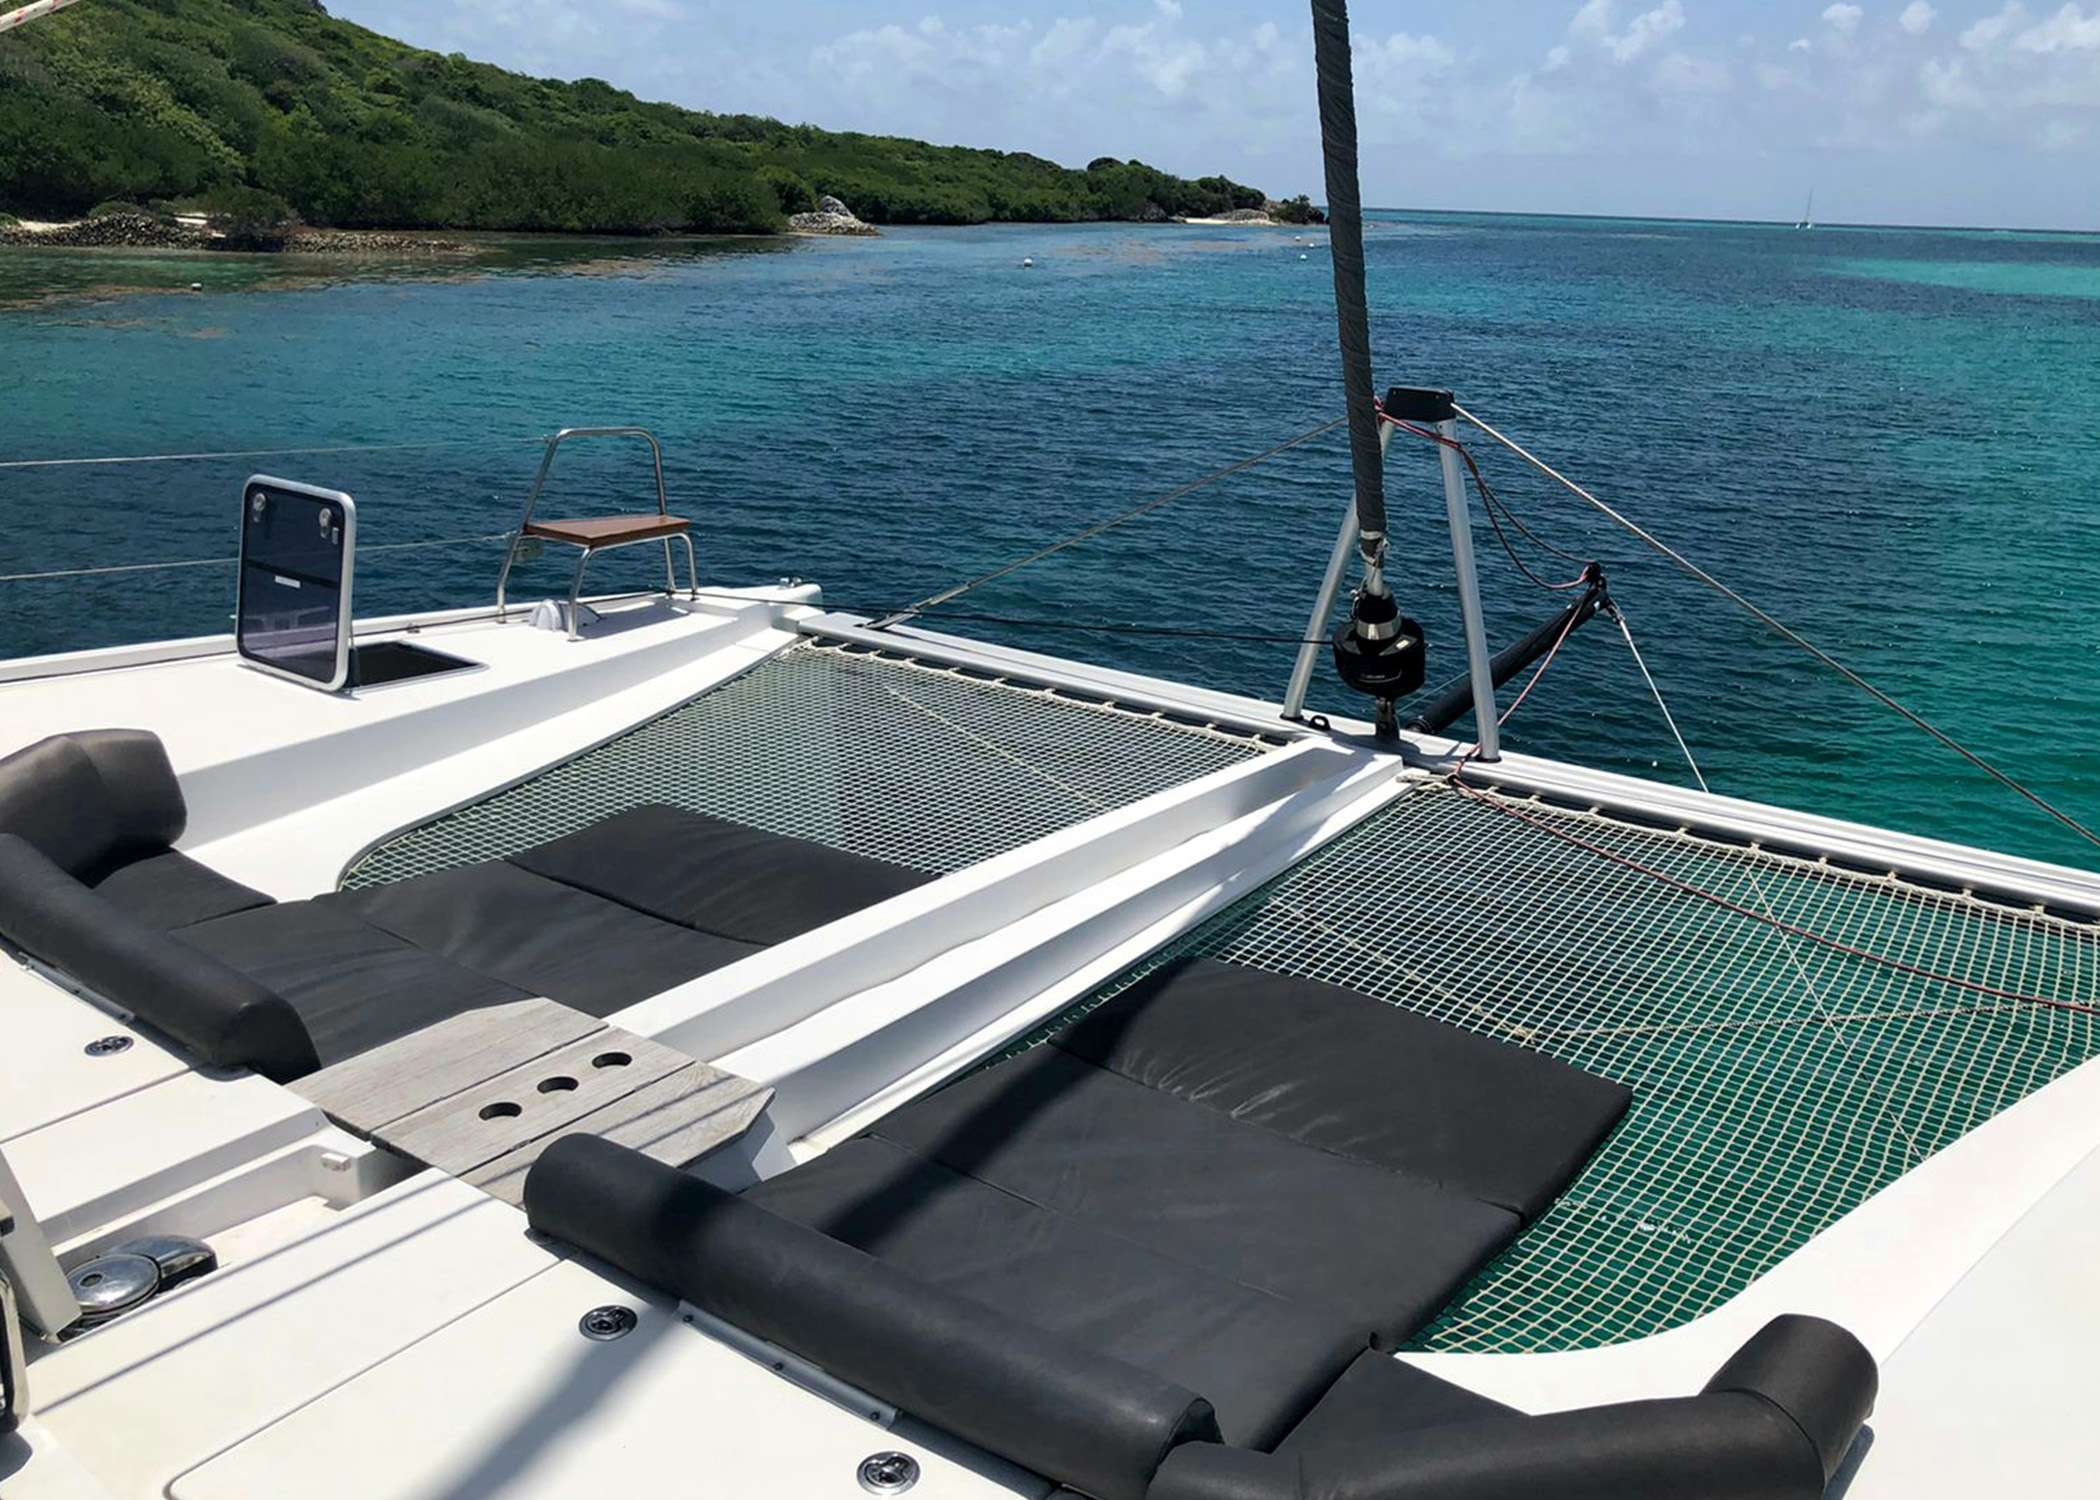 Freedom - Luxury yacht charter St Martin & Boat hire in Caribbean 5